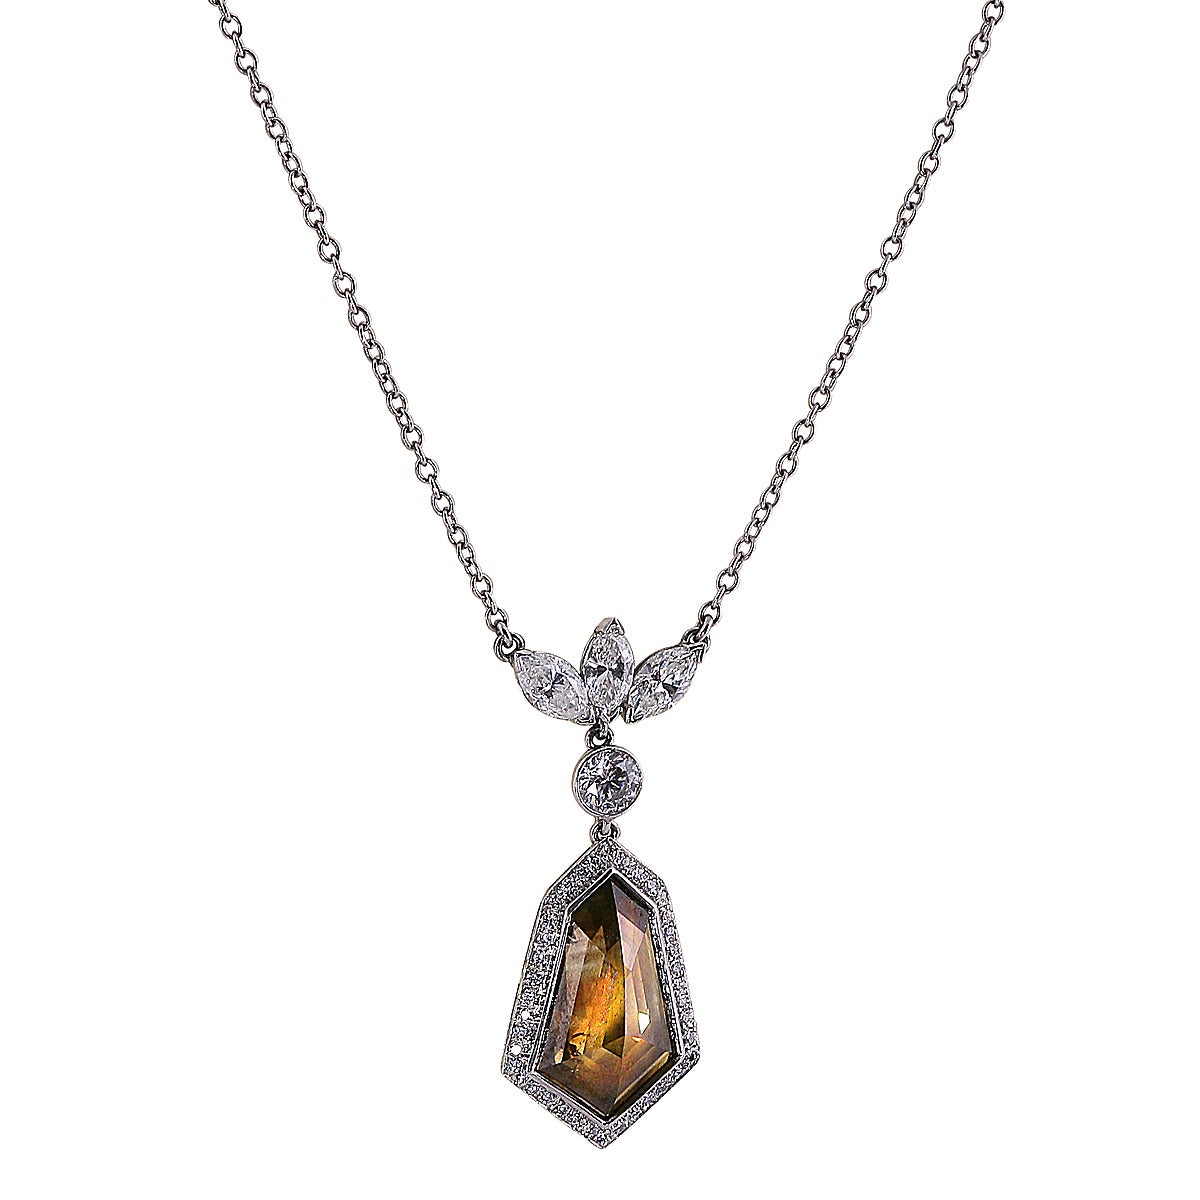 Stunning Vivid Diamonds fancy colored diamond necklace crafted in platinum, showcasing a gorgeous GIA certified kite shape diamond weighing 6.10 carats, Fancy to fancy dark brown-greenish yellow, natural color framed in 40 round brilliant cut